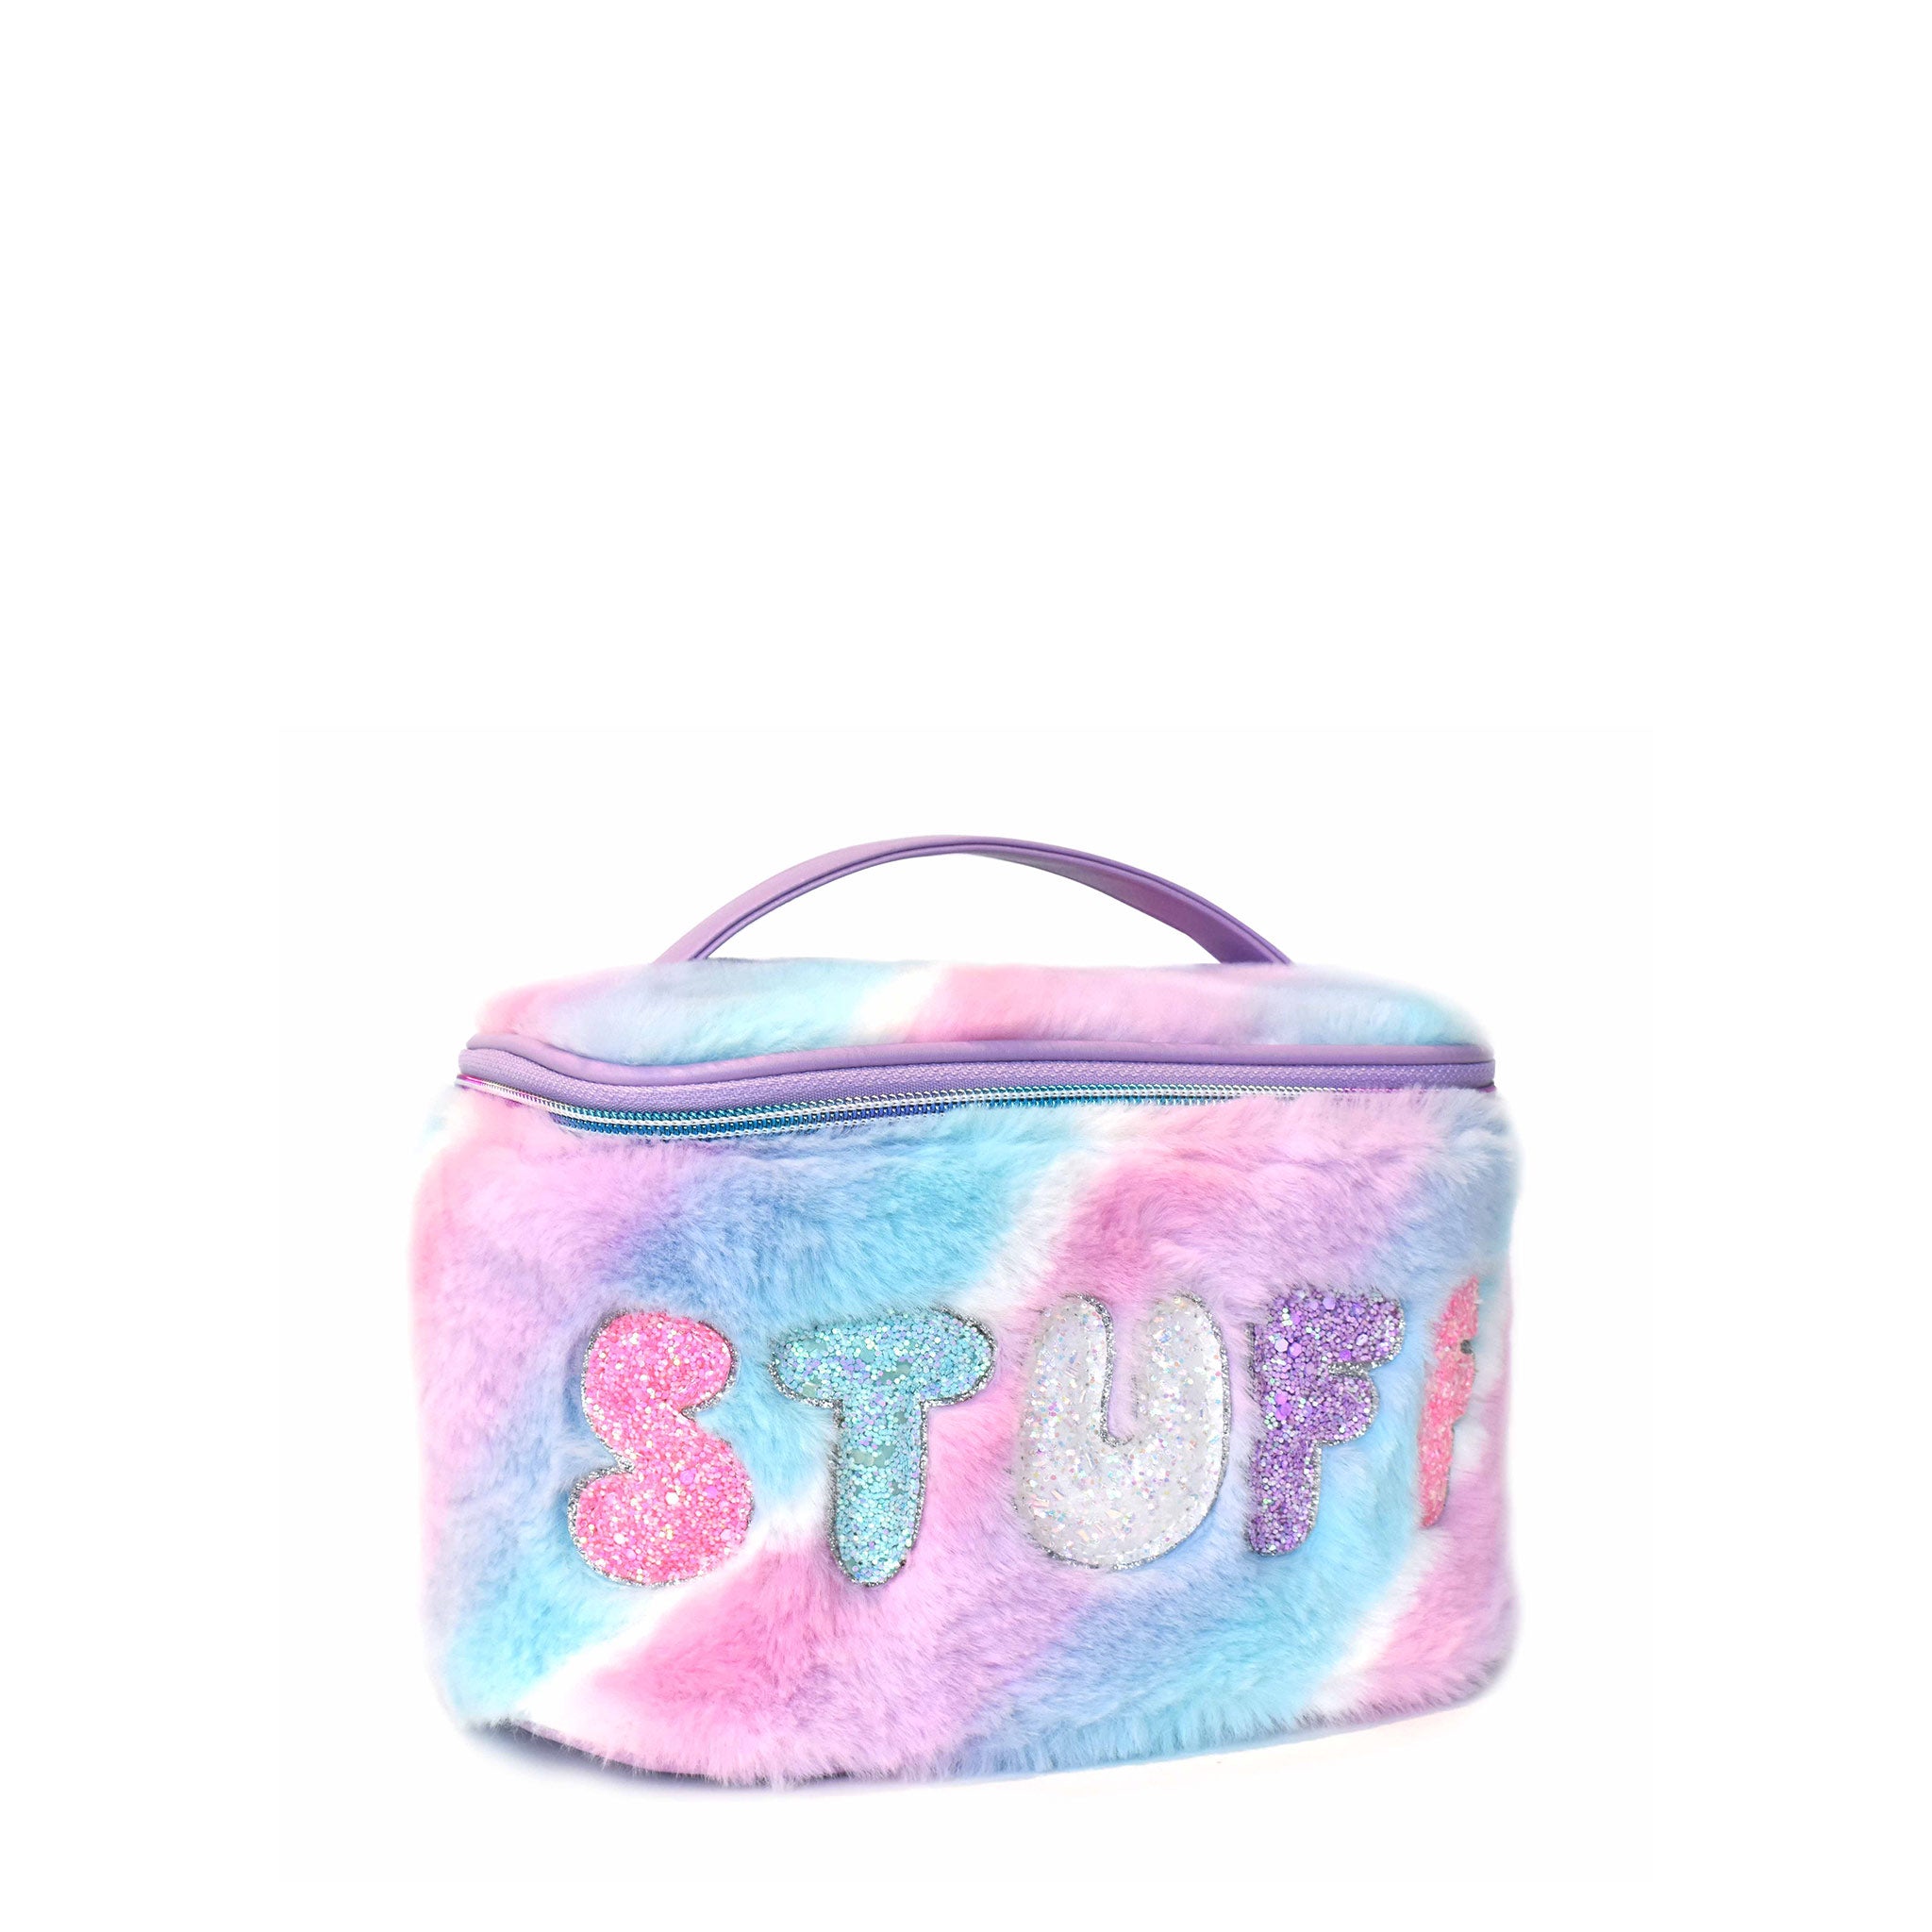 Side view of a purple, blue and white pastel ombre plush train case with glitter bubble letters 'STUFF'